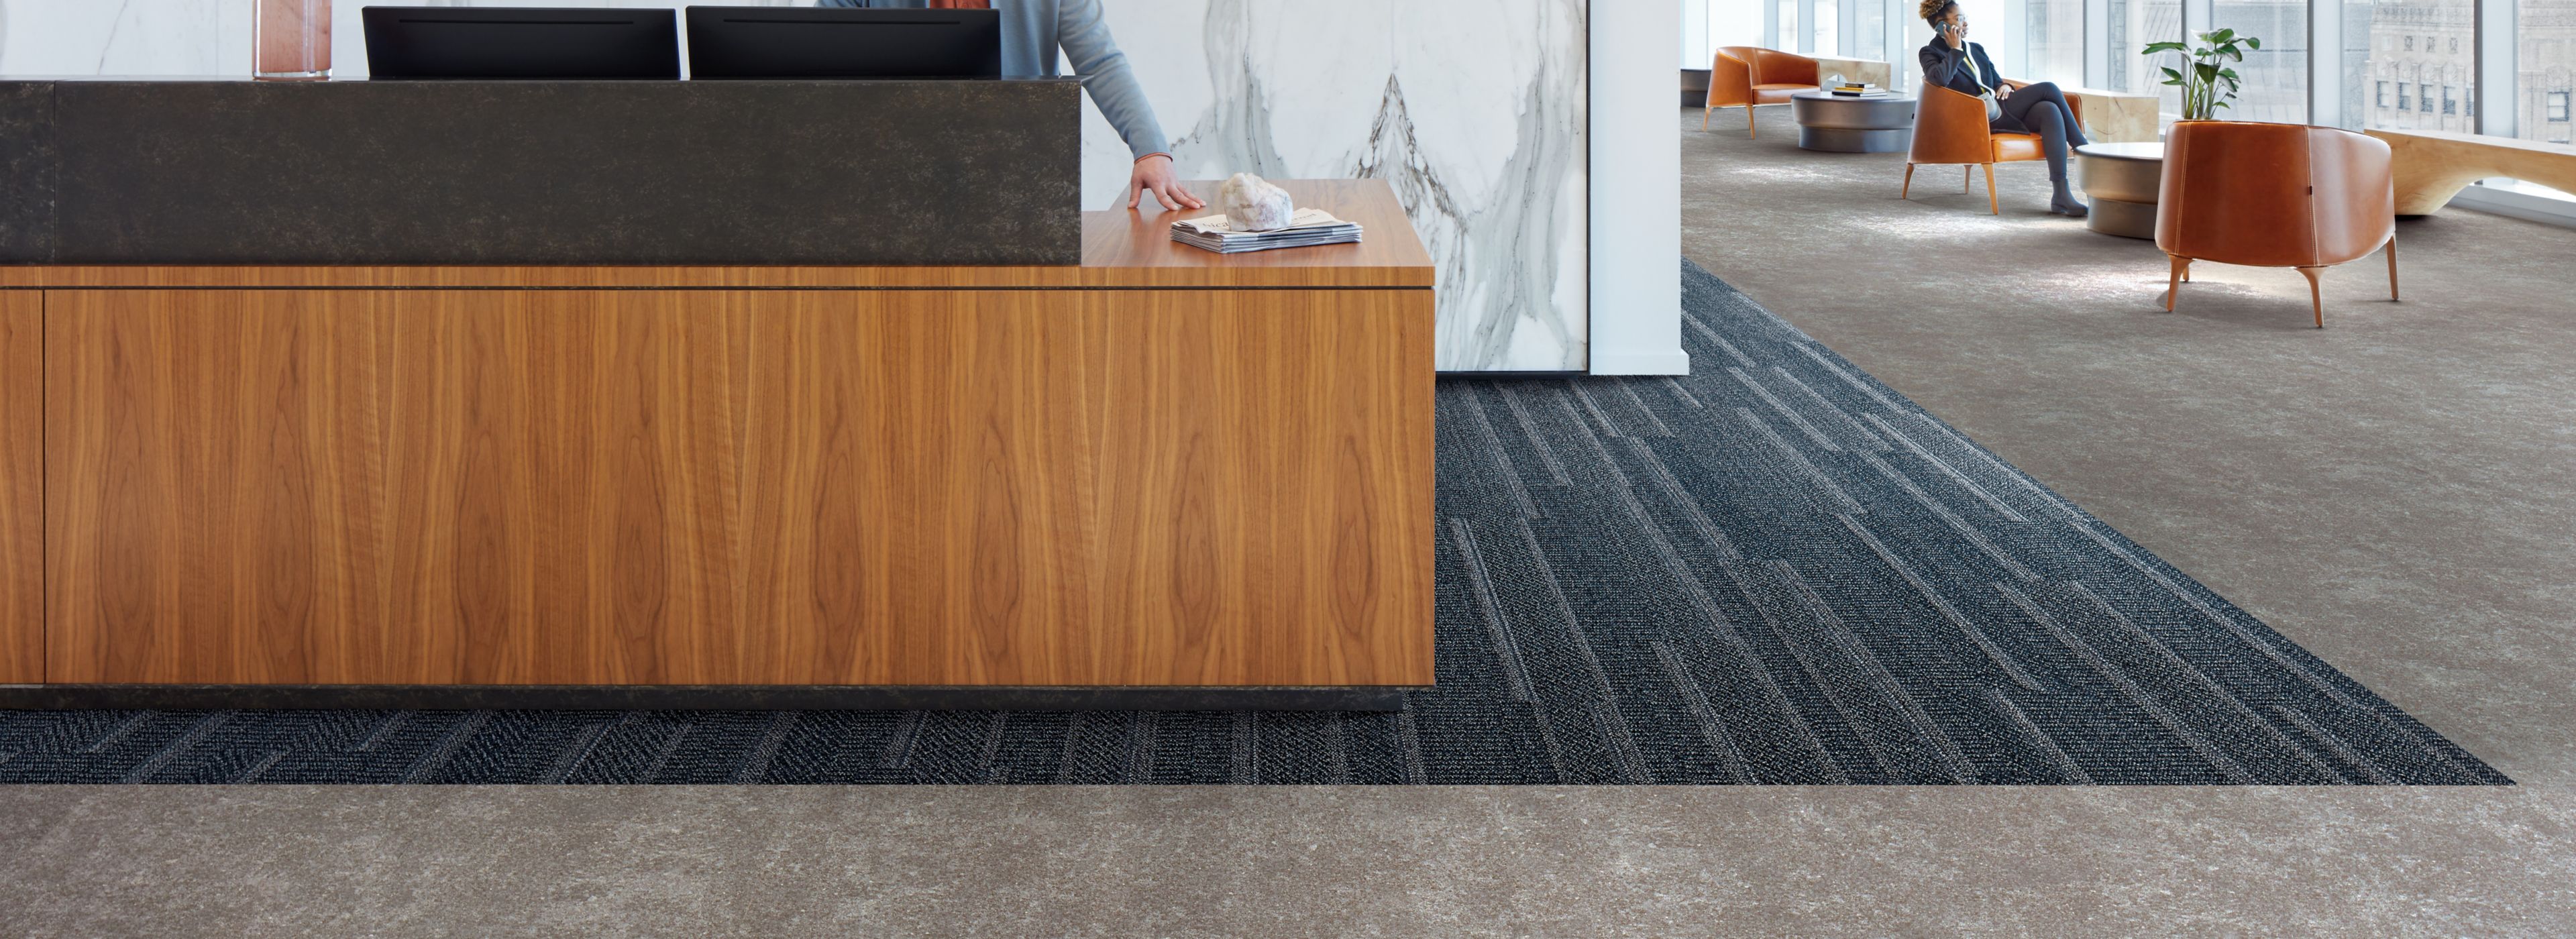 Interface Simple Sash plank carpet tile and Walk of Life LVT in a corporate lobby area with front desk  Bildnummer 1